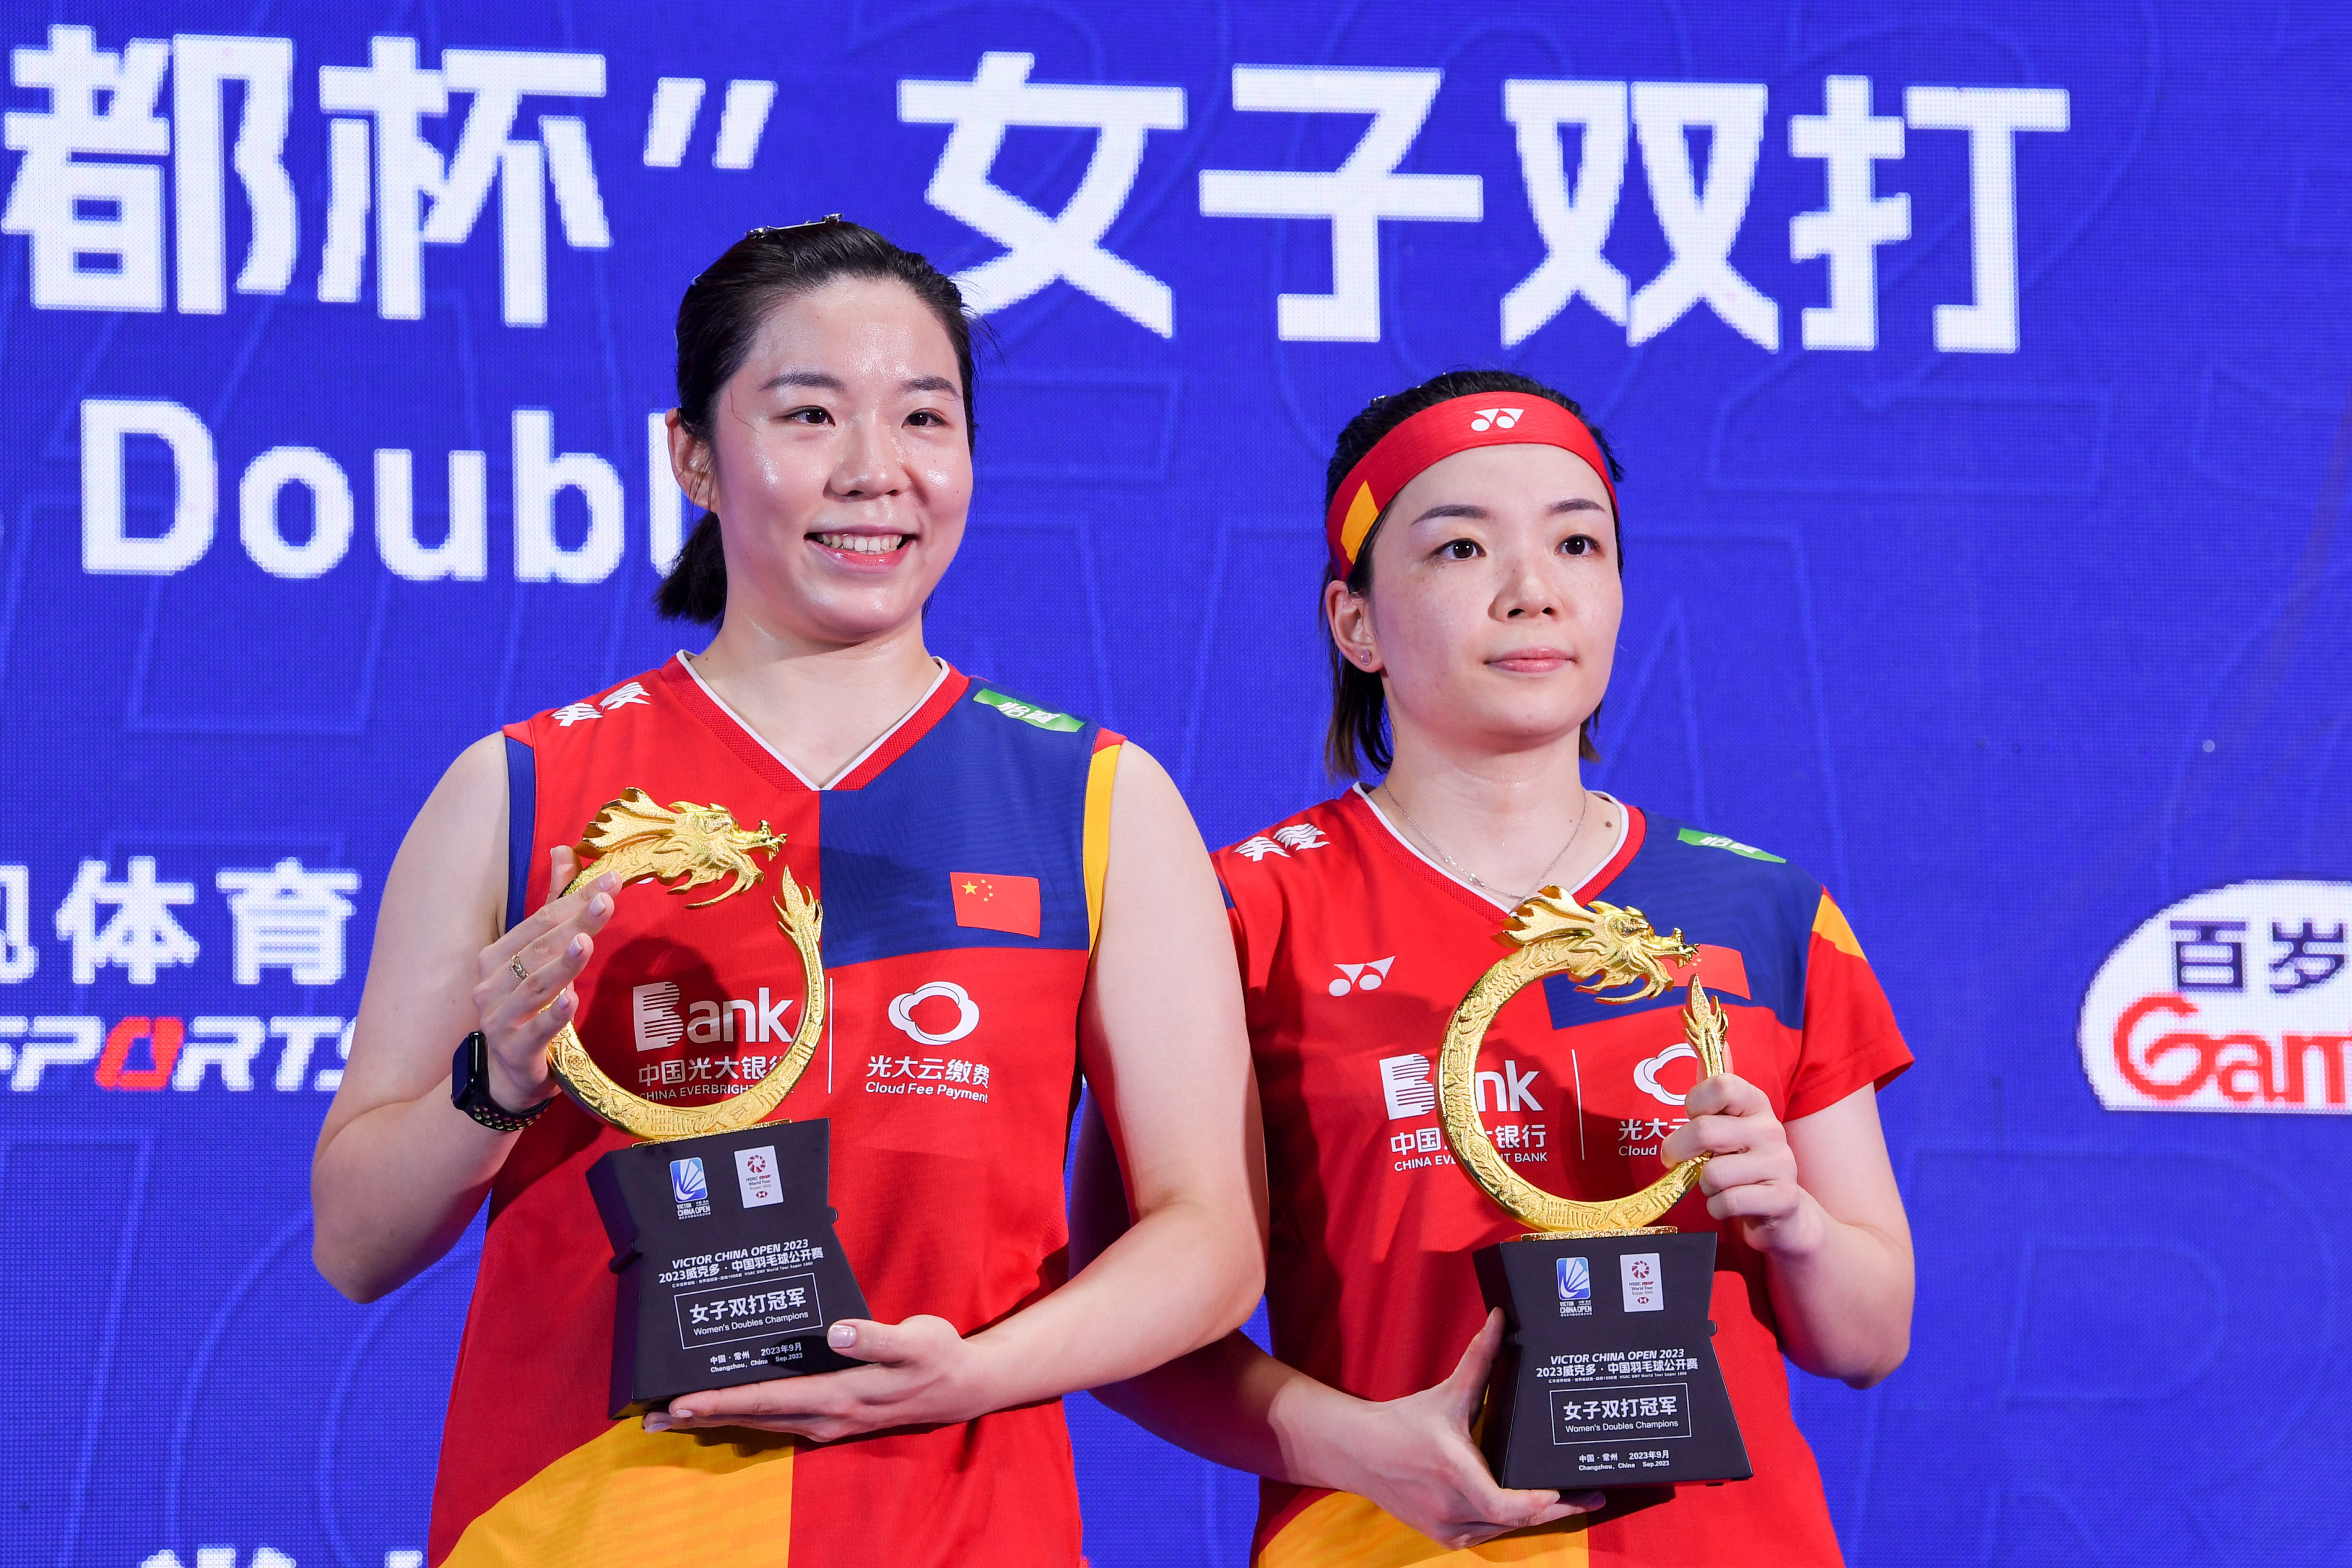 Chen Qingchen (right) and Jia Yifan with their trophies after winning the China Open women’s doubles final. Photo: Xinhua